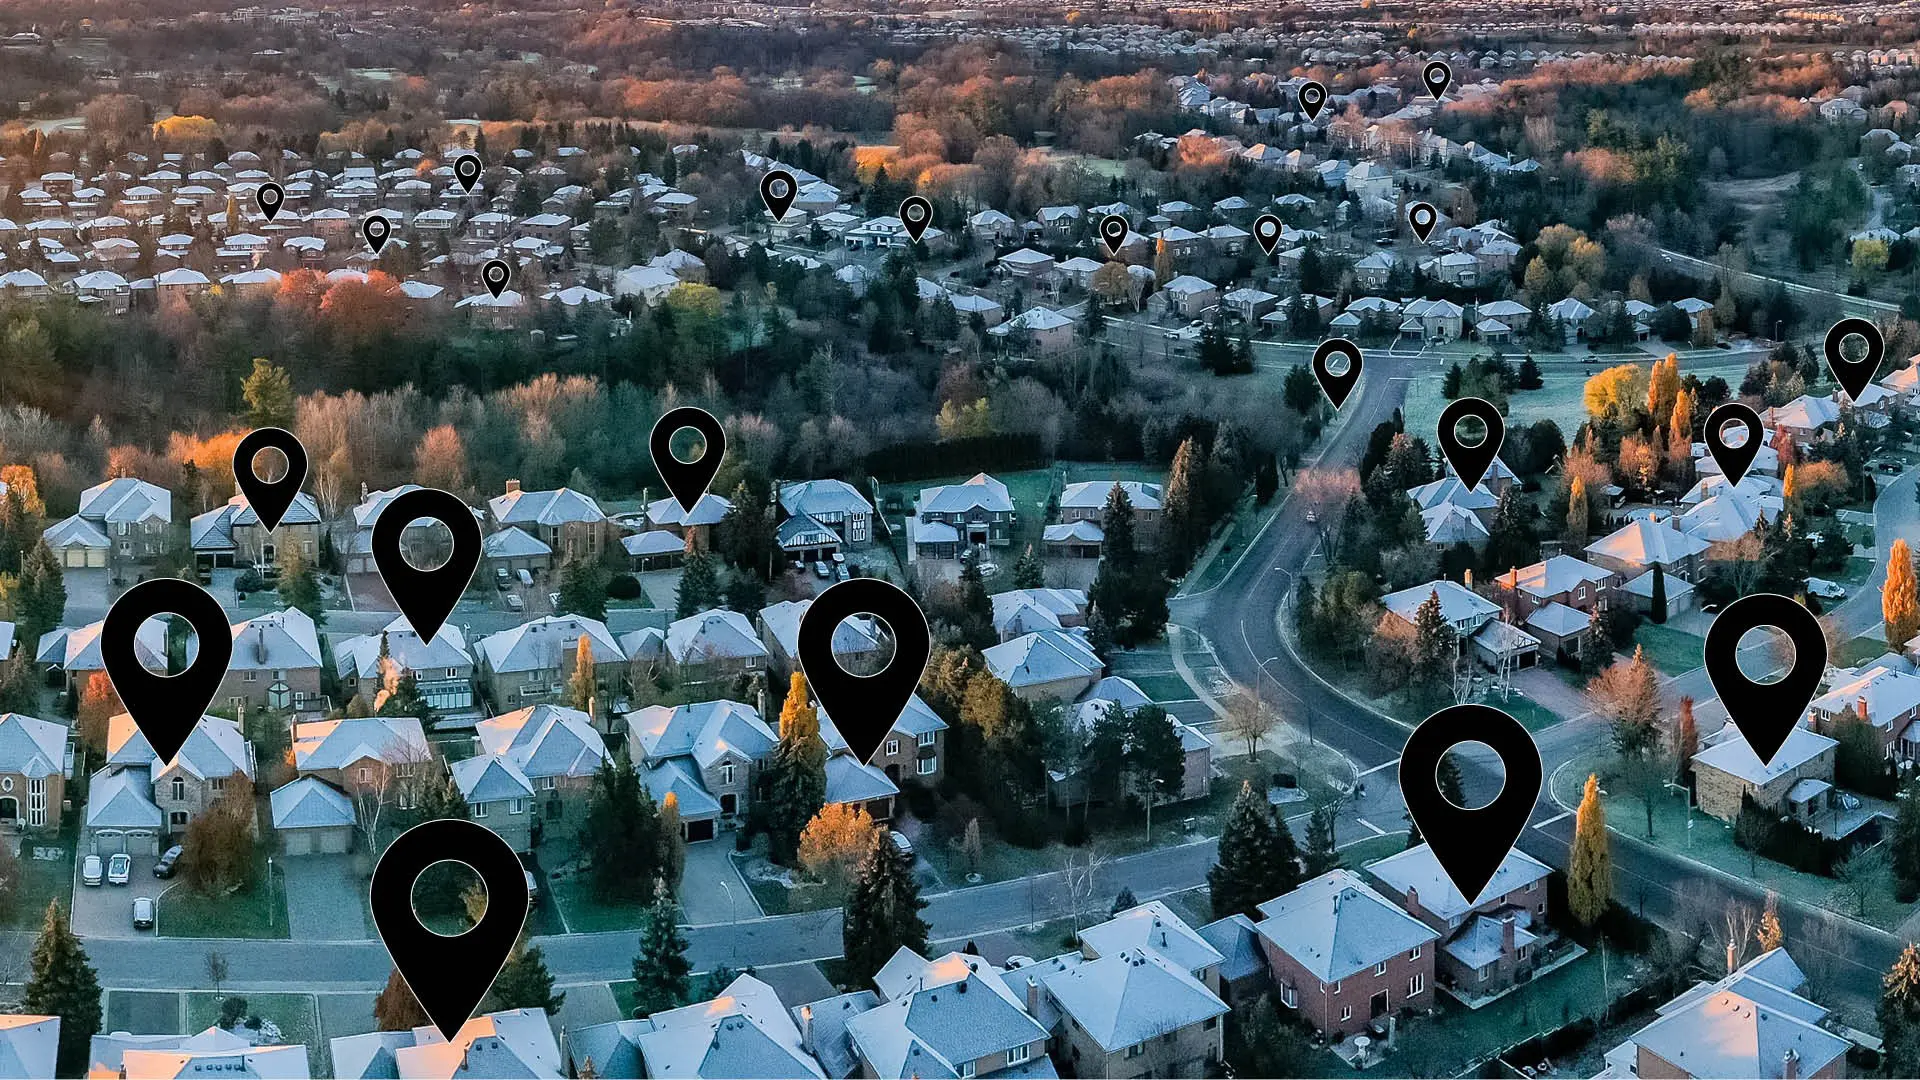 An arial view of houses with location icons over some of them, illustrating trackable qr codes